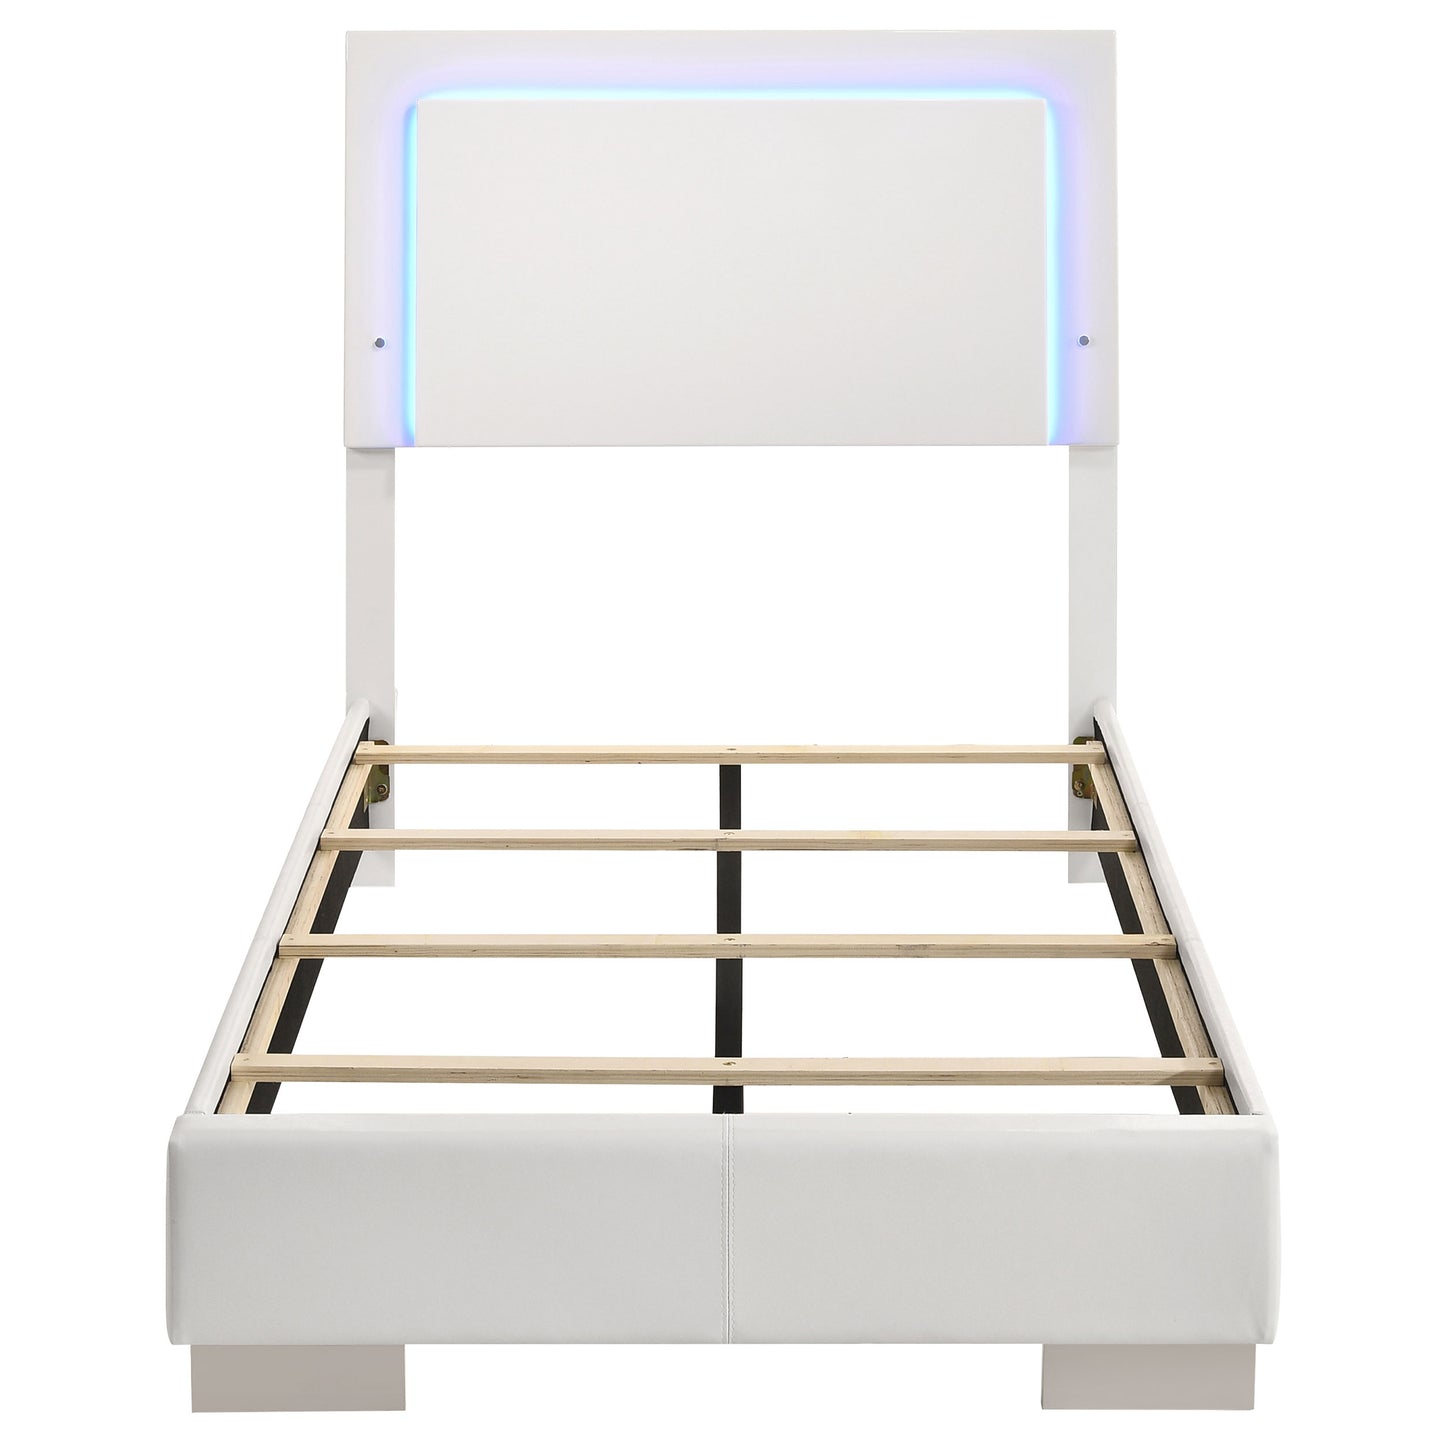 Felicity Wood Twin LED Panel Bed White High Gloss